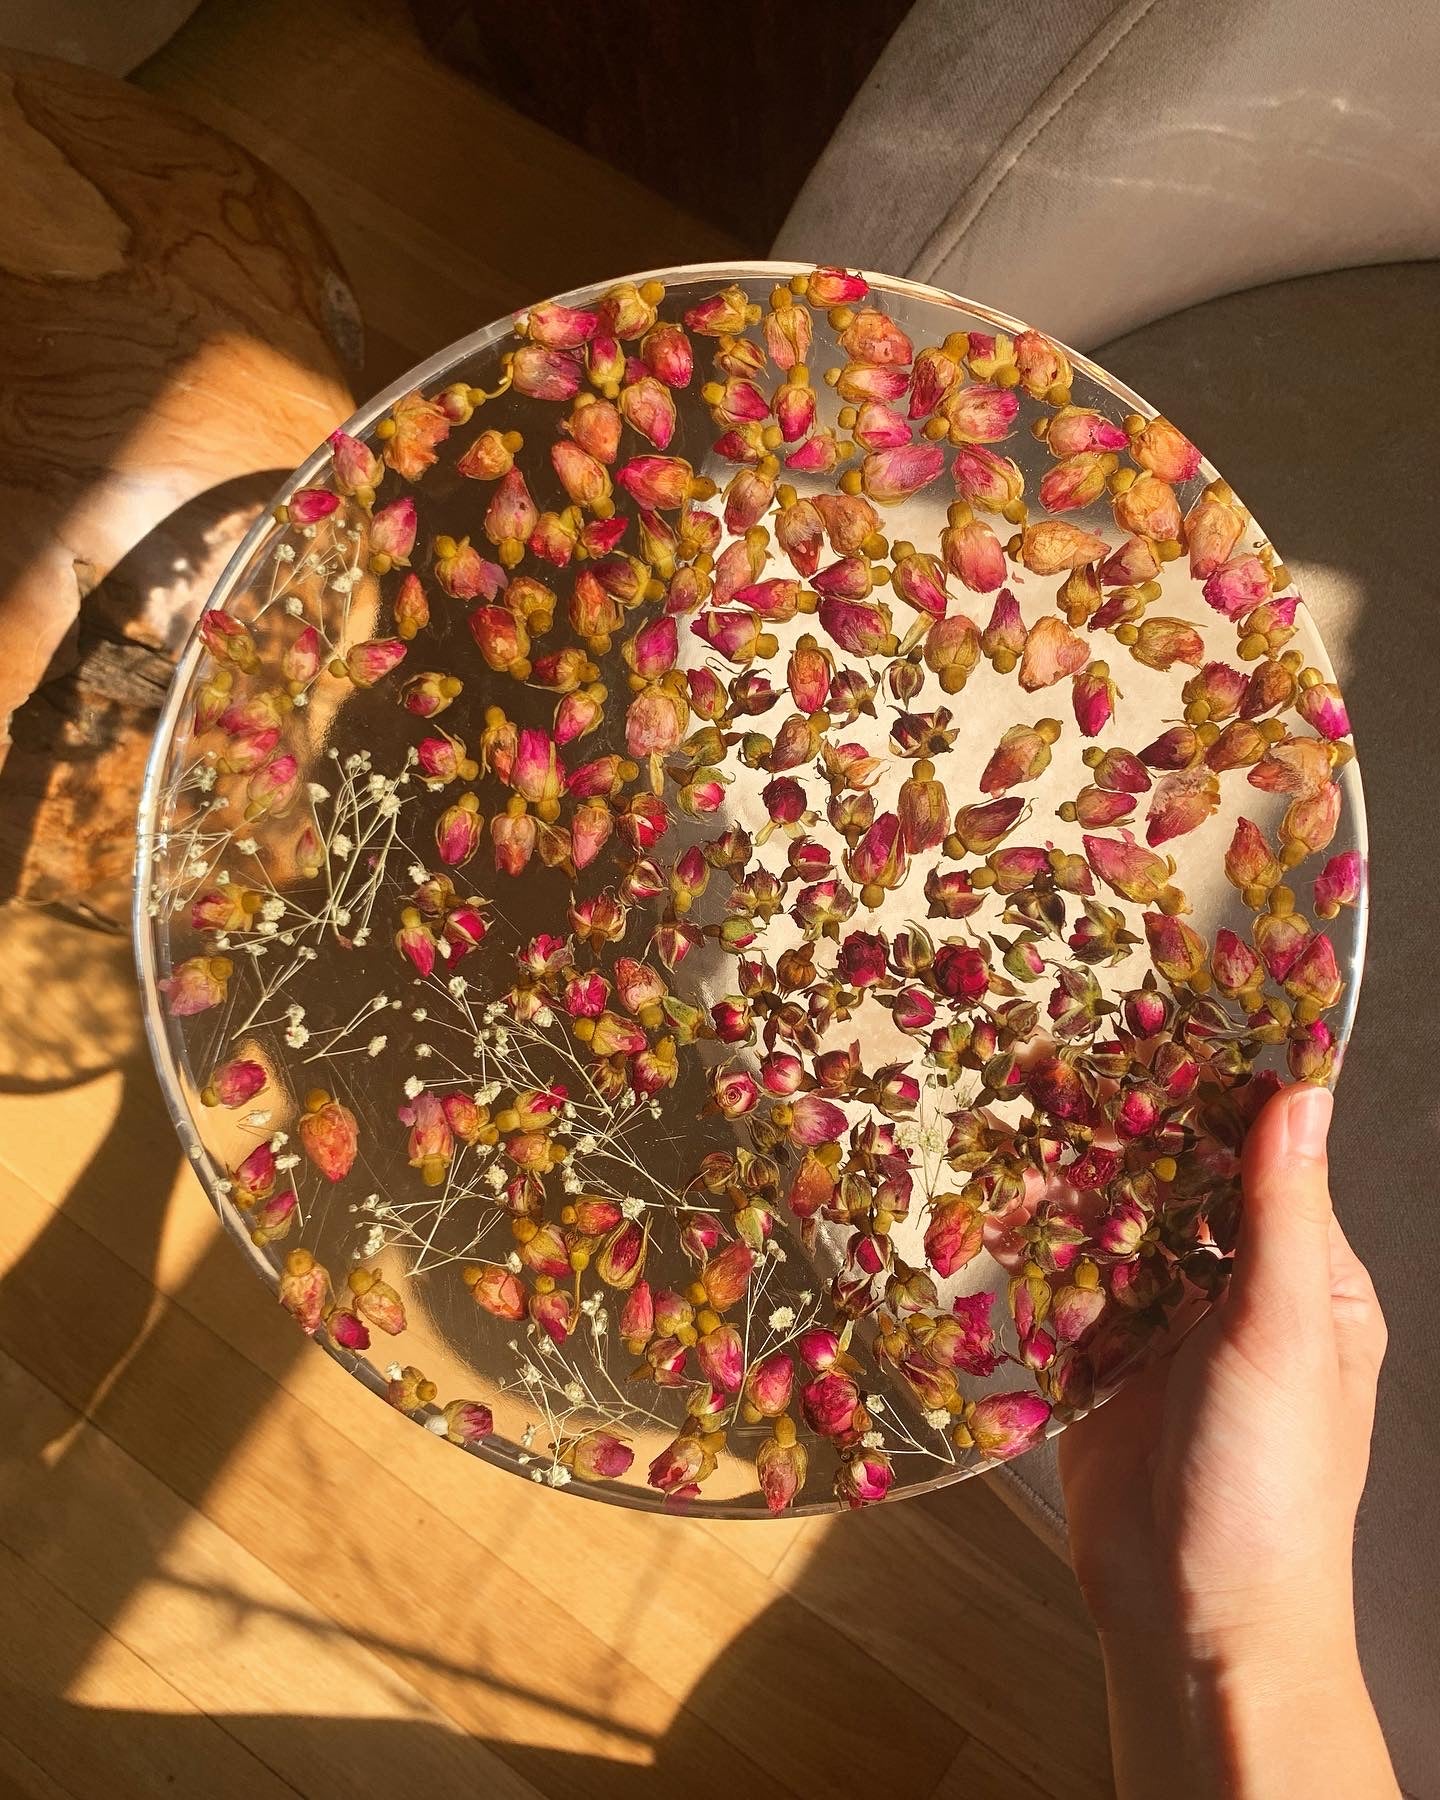  Hundreds of rosebuds sit suspended between sprigs of baby's breath. A durable-yet-whimsical addition to your home decor. Serve cocktails, use as a vanity tray, or simply display as an incredible objet d'art.  Approximately 12" diameter and 3/4" thickness.